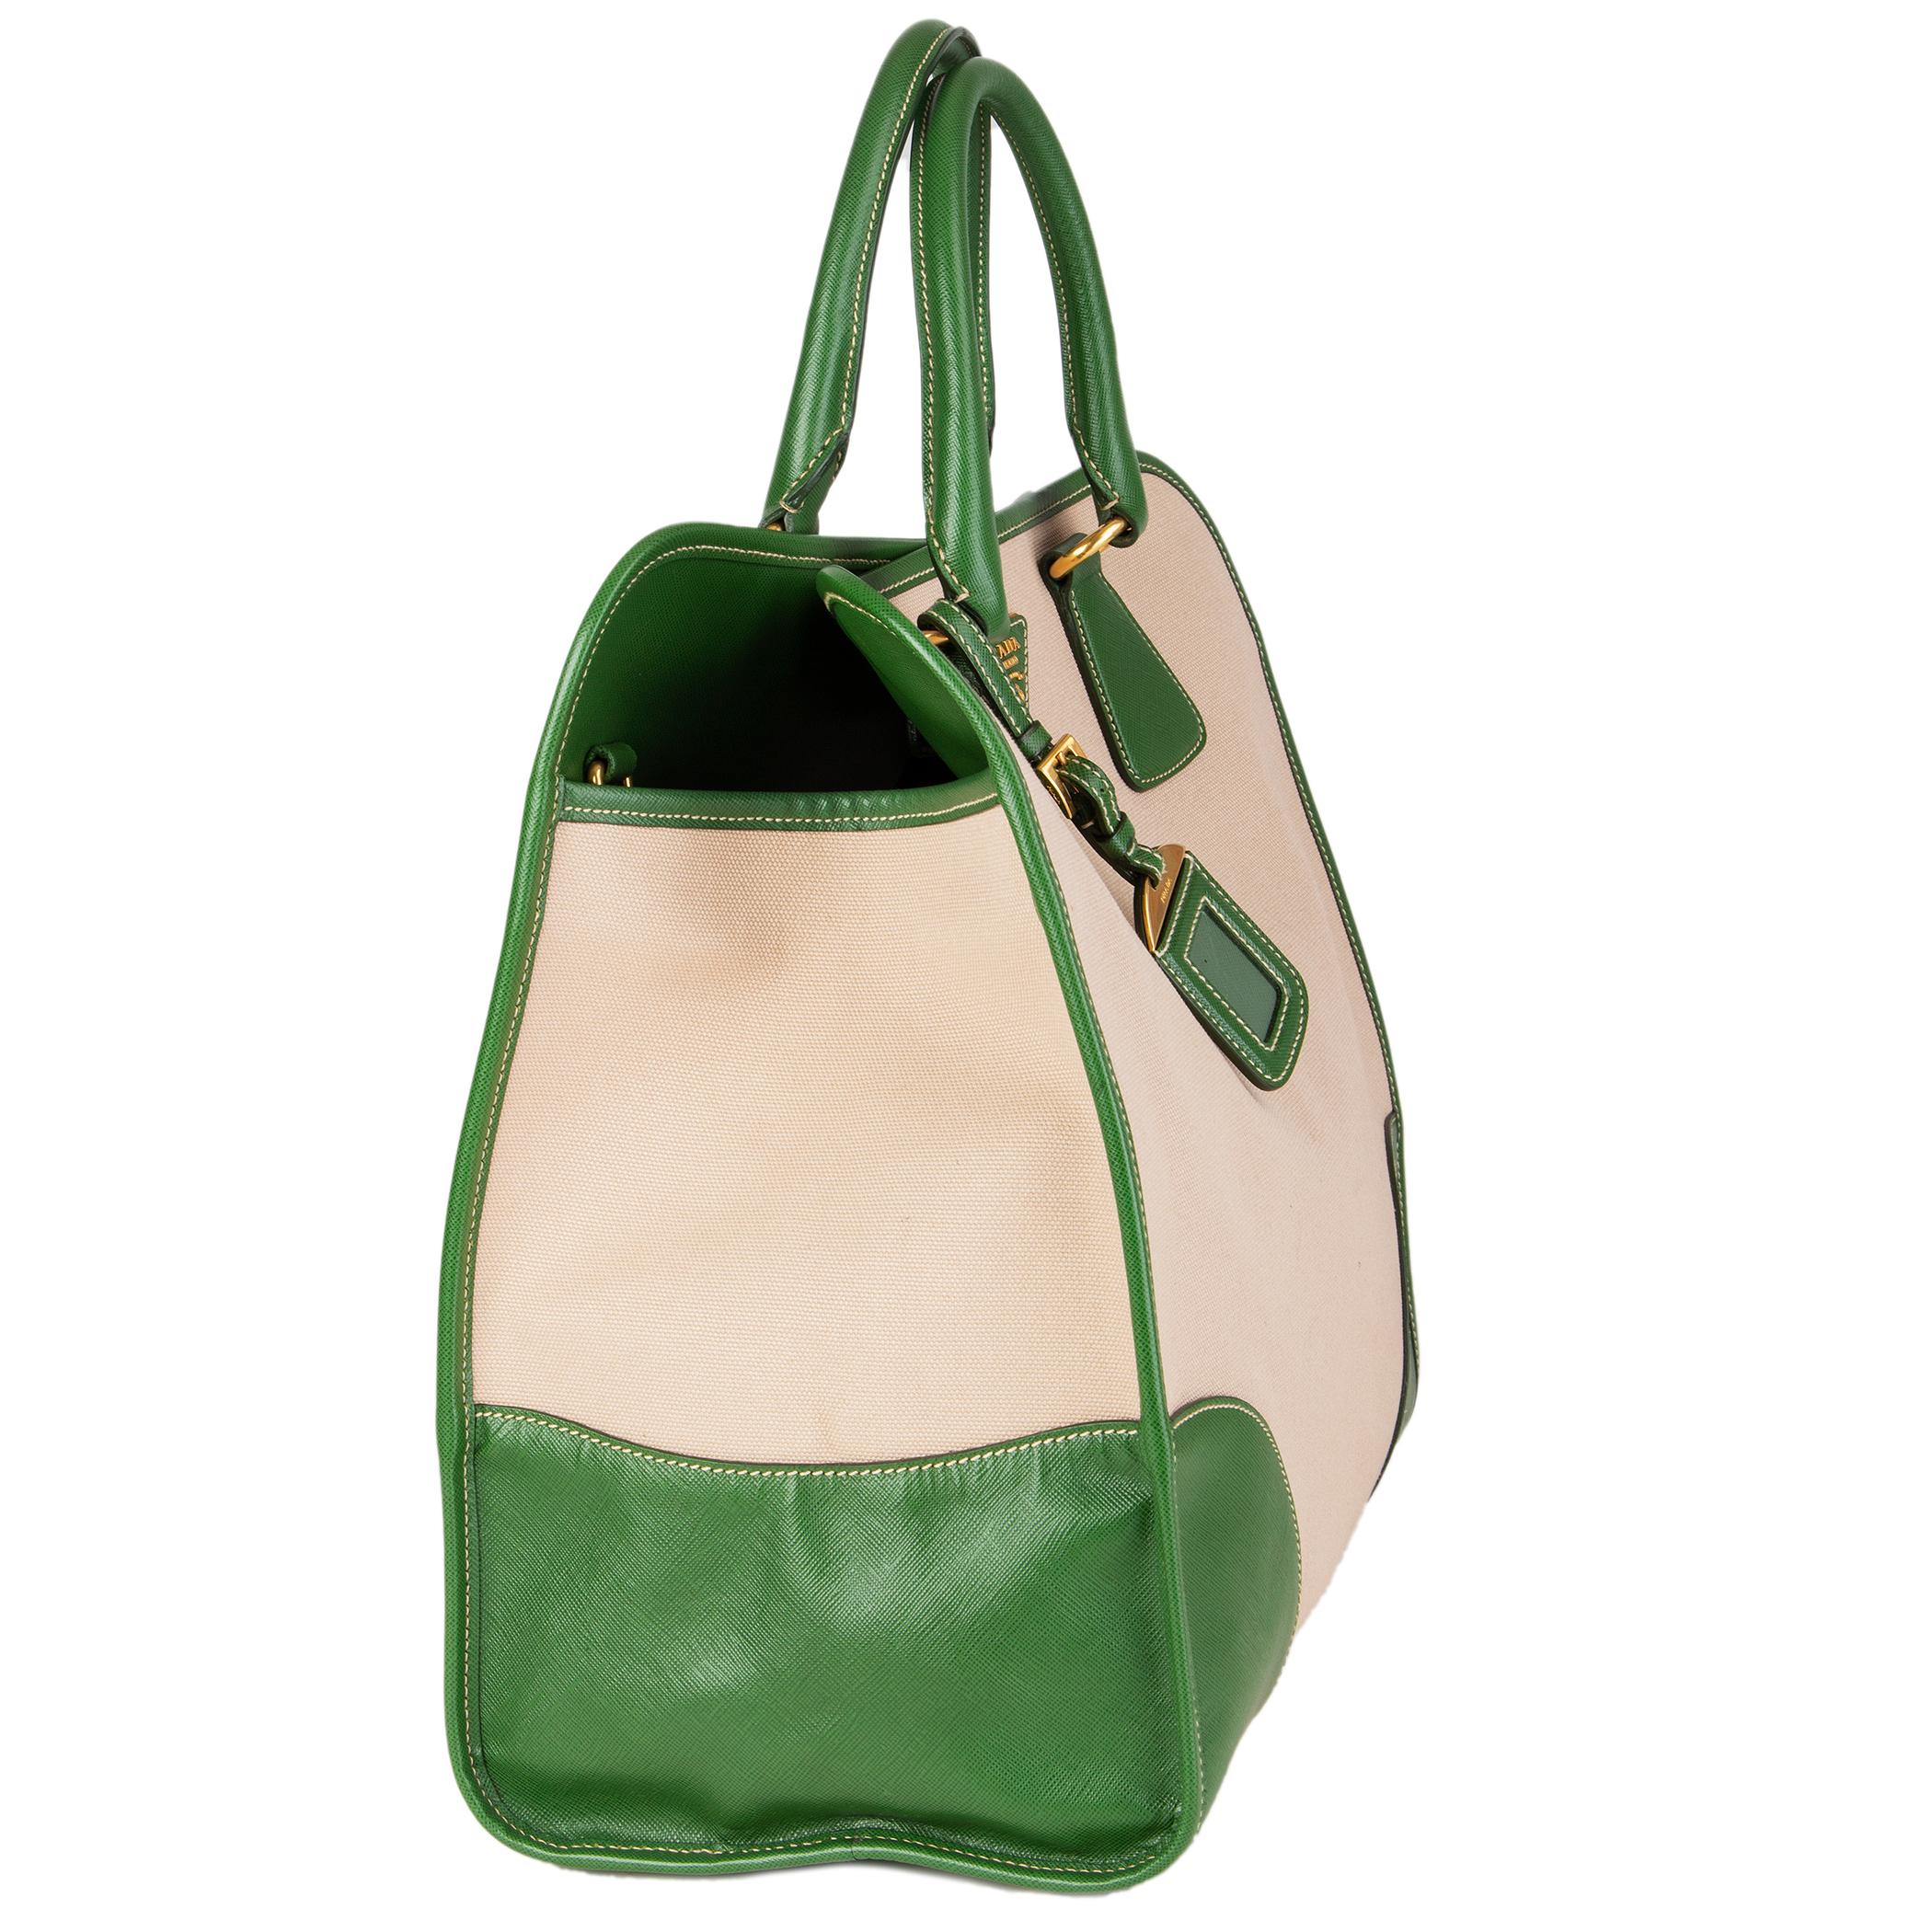 Prada framed 'North-To-South Tote Bag' in beige hemp canvas and green Saffiano calf leather details. Opens with a snap button on top. Lined in green classic Prada nylon lining with one zipper pocket against the back and front with two attached open